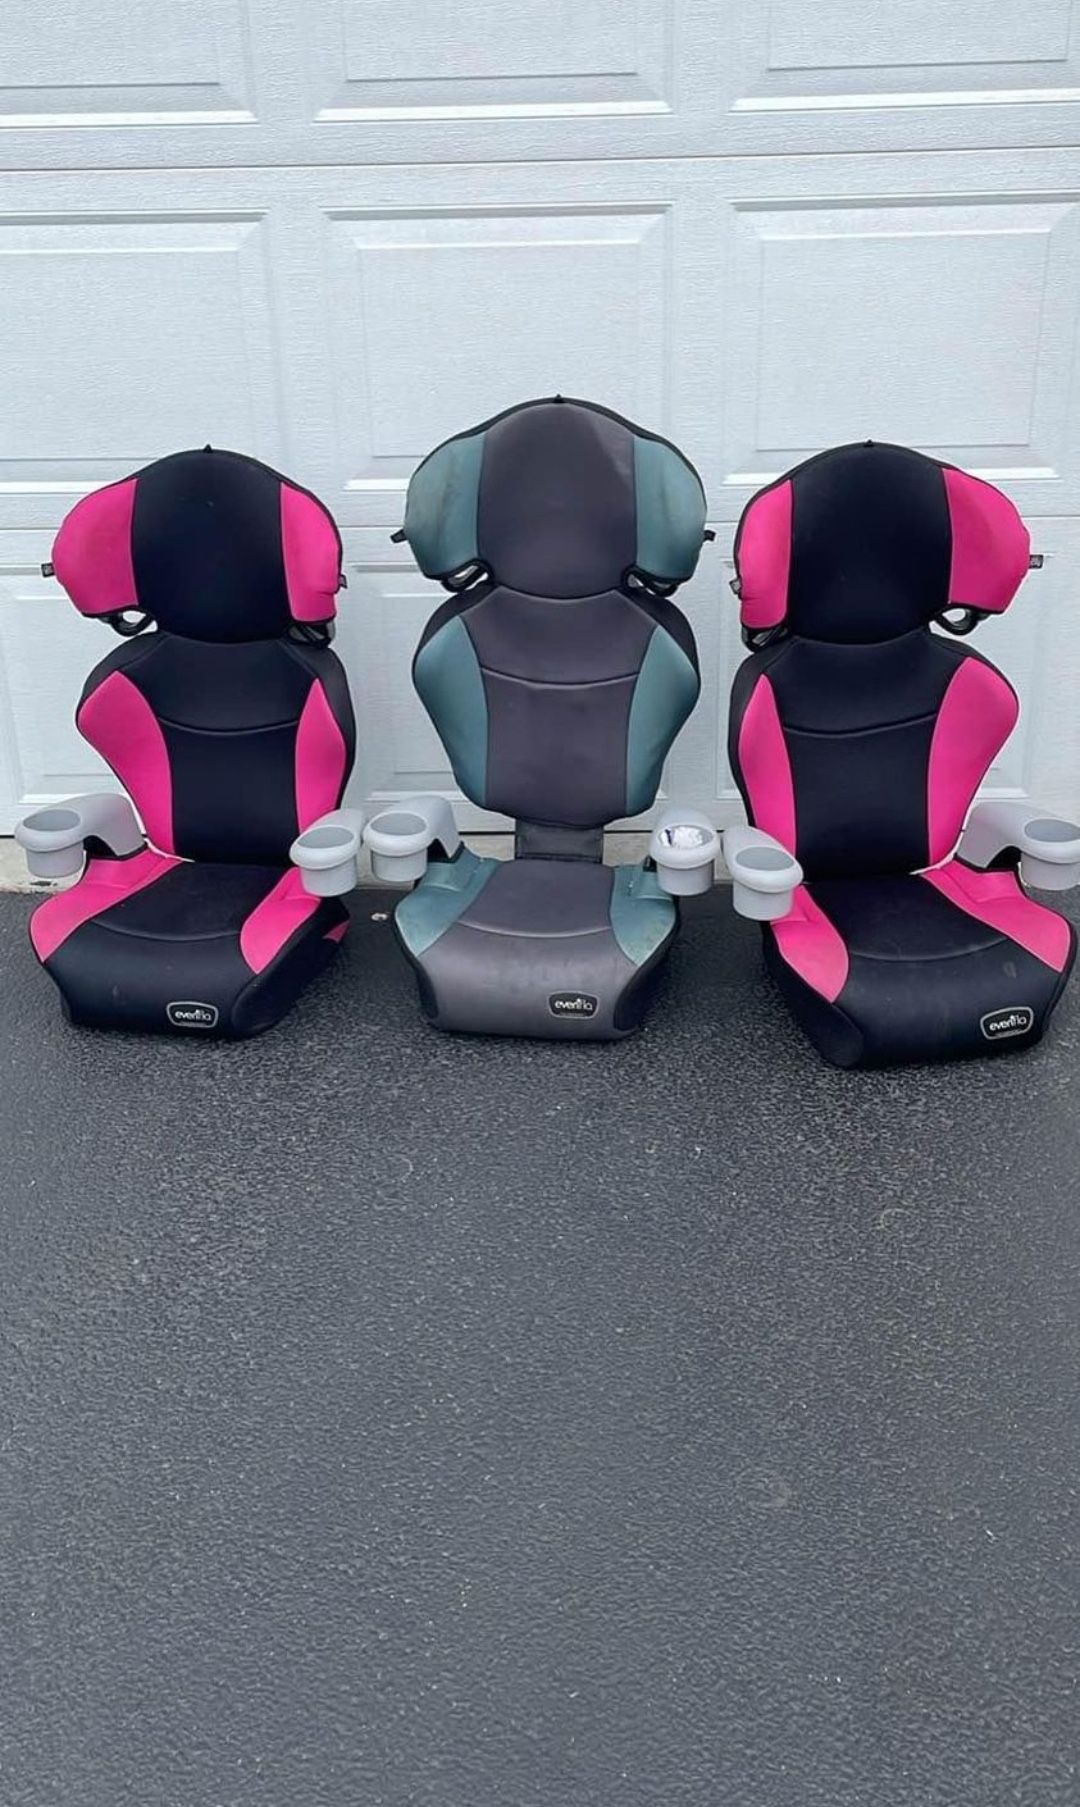 Evenflo Car Seat 👀Price For Each 